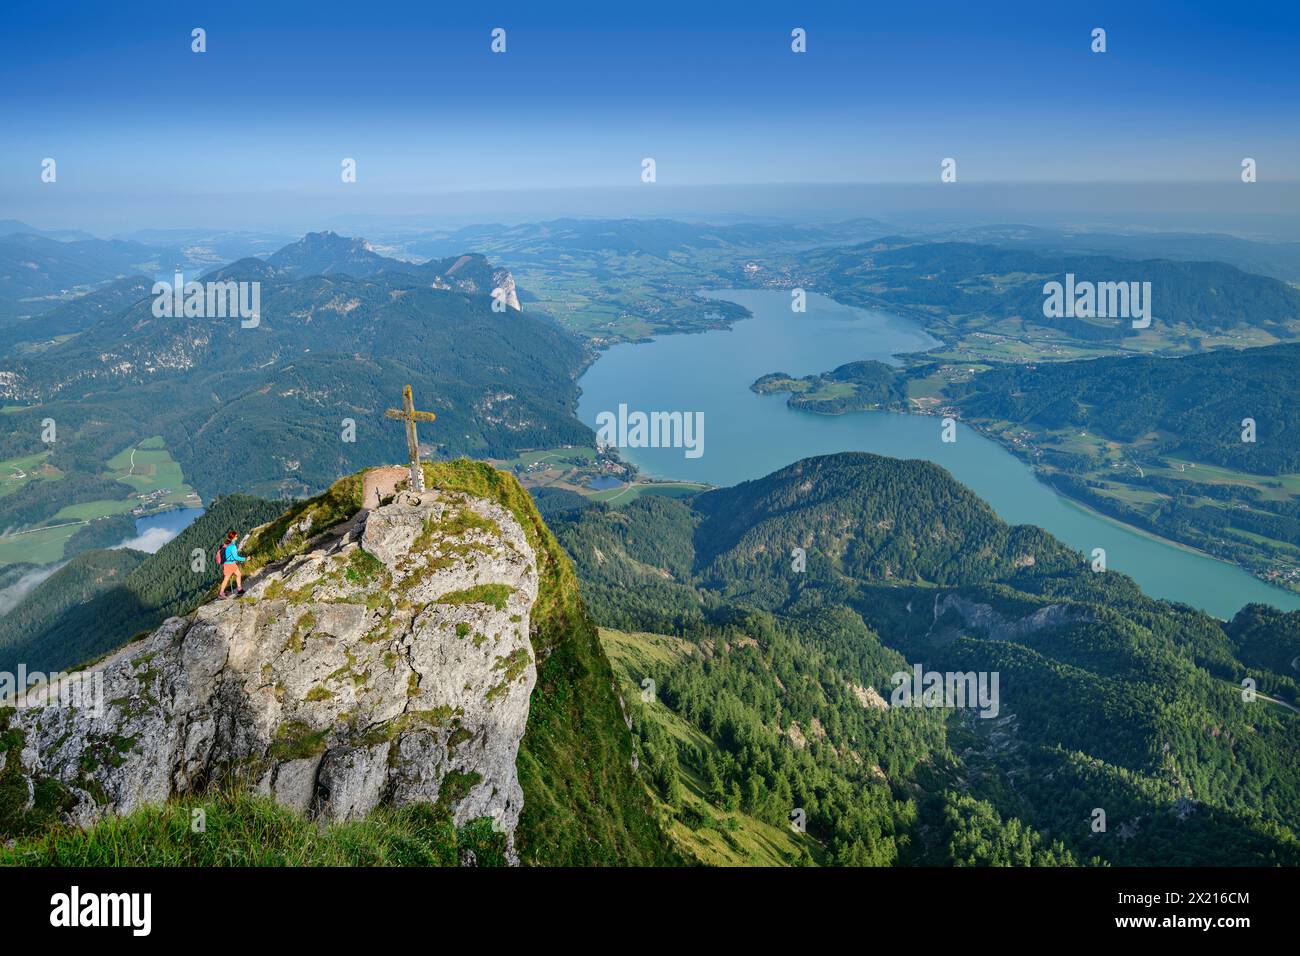 Woman hiking approaches the summit cross at the Himmelspforte, Mondsee in the background, Himmelspforte, Schafberg, Salzkammergut Mountains, Salzkamme Stock Photo